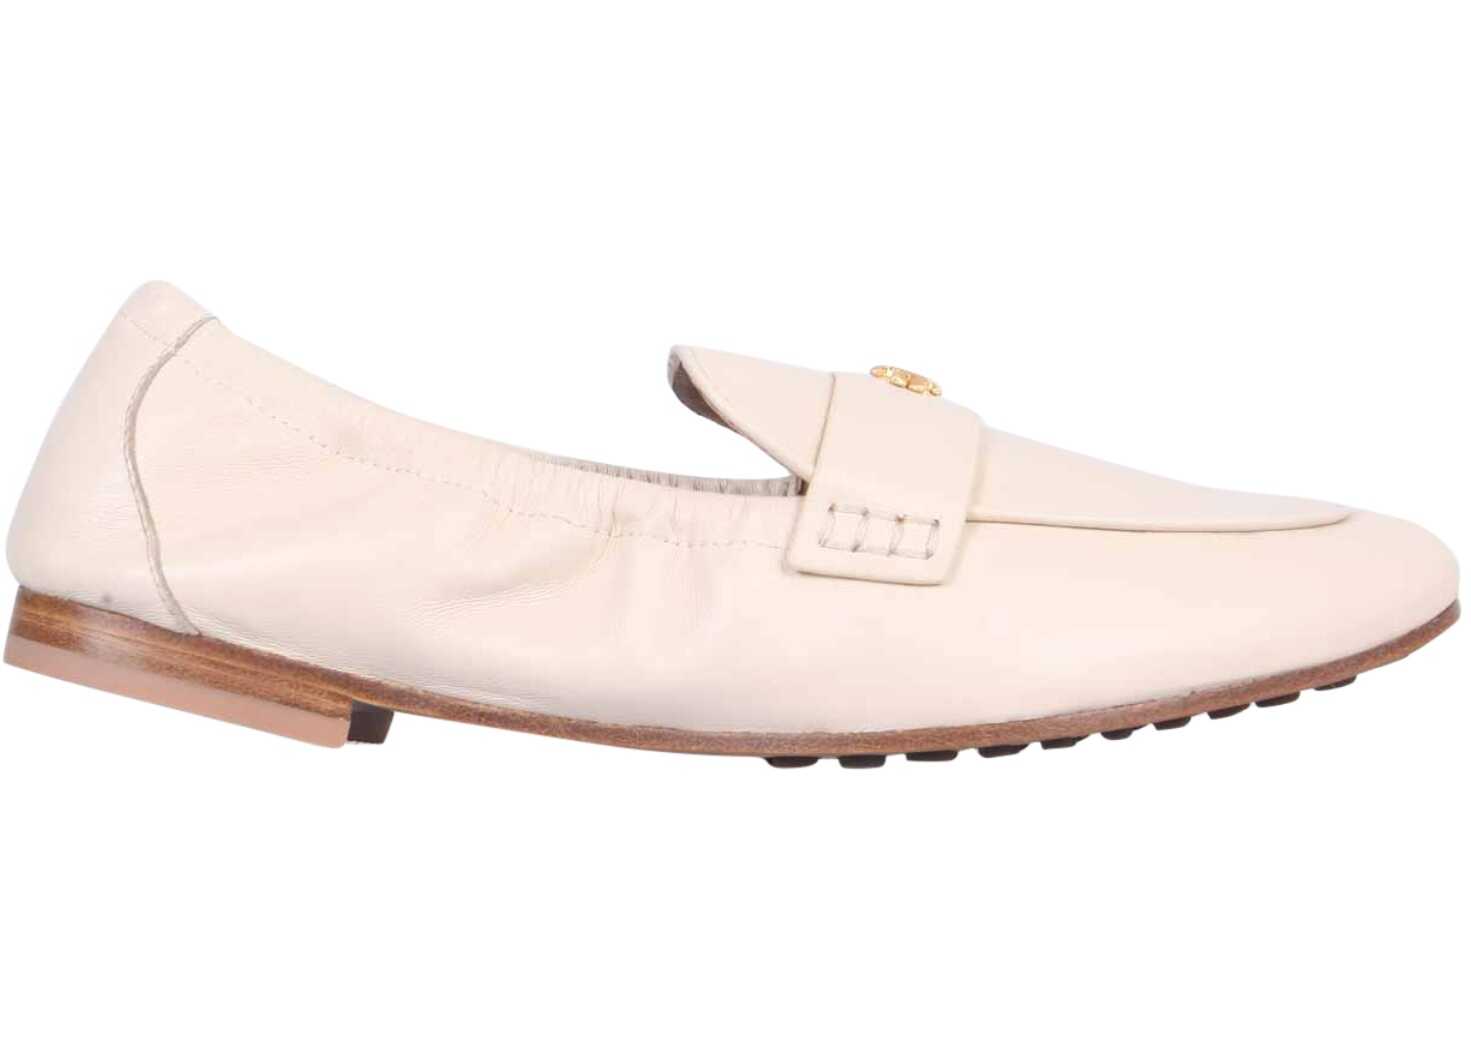 Tory Burch Leather Moccasins 87269_122 WHITE image